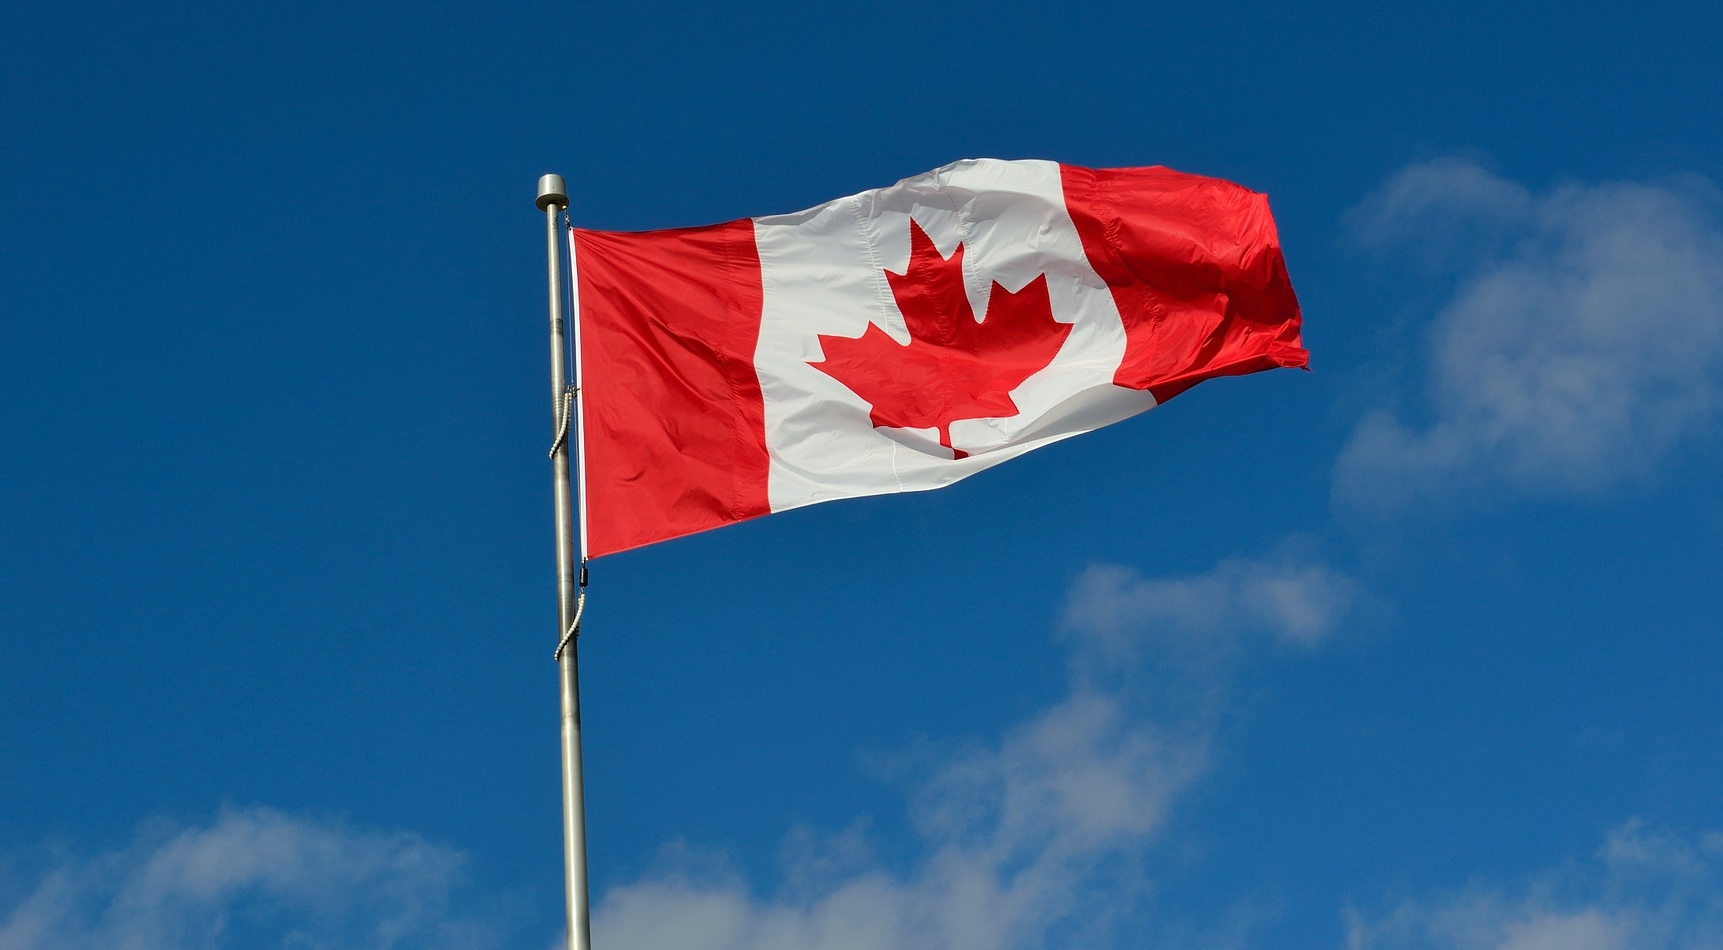 Canadian flag blowing in the wind against a blue sky